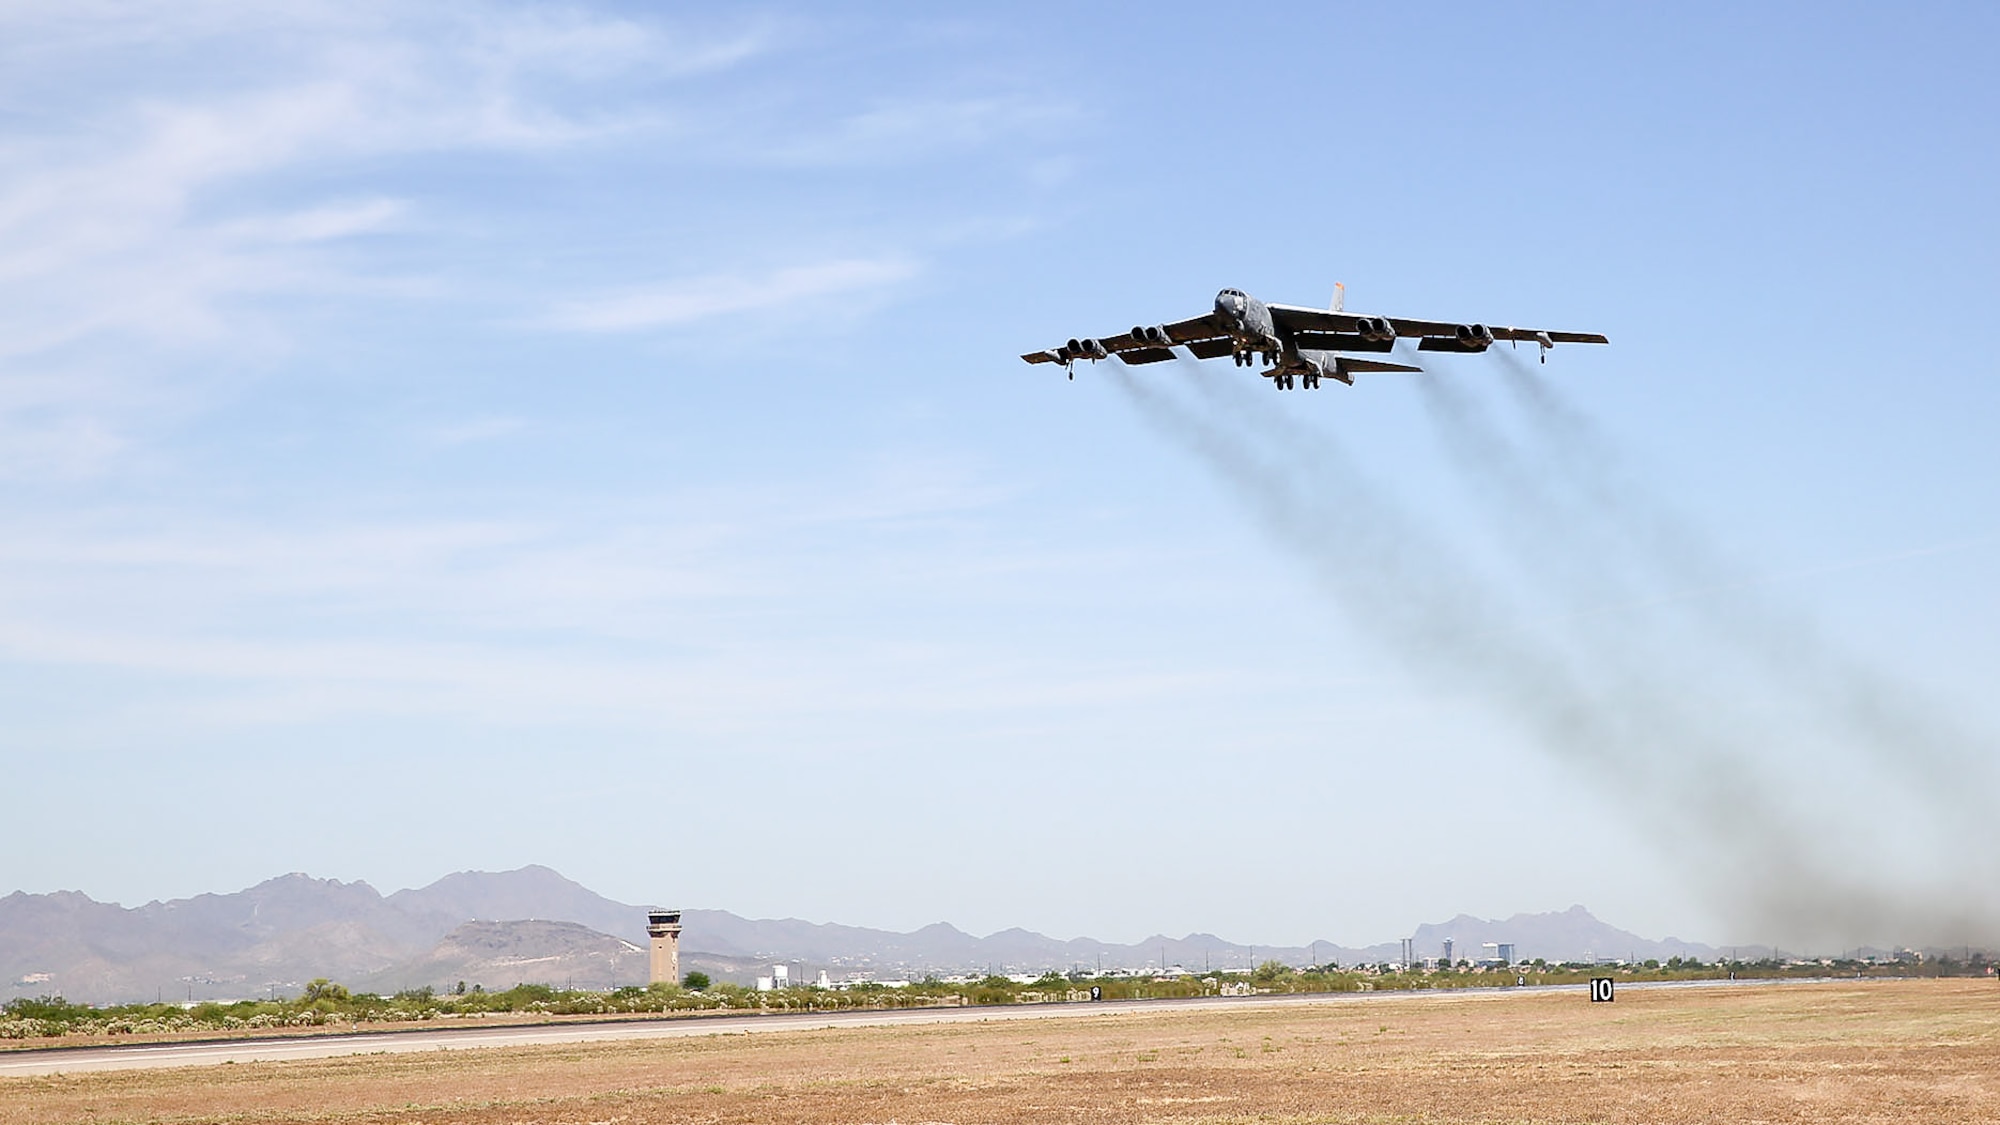 A B-52H Stratofortress, nicknamed "Wise Guy," departs Davis-Monthan Air Force Base, Ariz., May 14, 2019. The bomber was flown out of the 309th Aerospace Maintenance and Regeneration Group, also known as the "Boneyard", where it had been since 2008. (U.S. Air Force photo by Col. Jennifer Barnard)